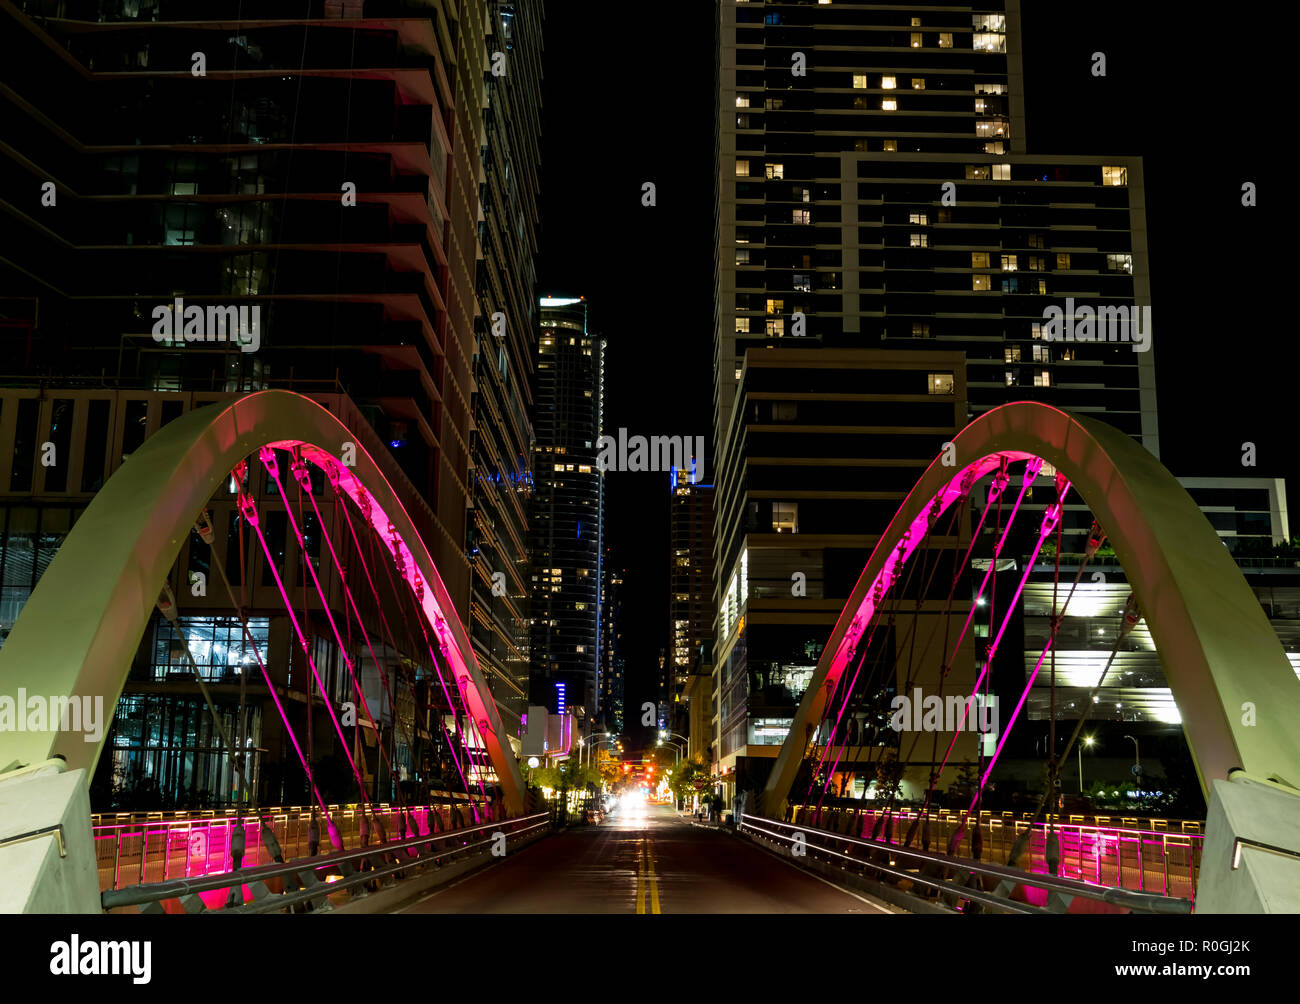 A new suspension bridge spanning shoal creek on 2nd street of downtown Austin, Texas flashes multiple bright colors at night. Stock Photo